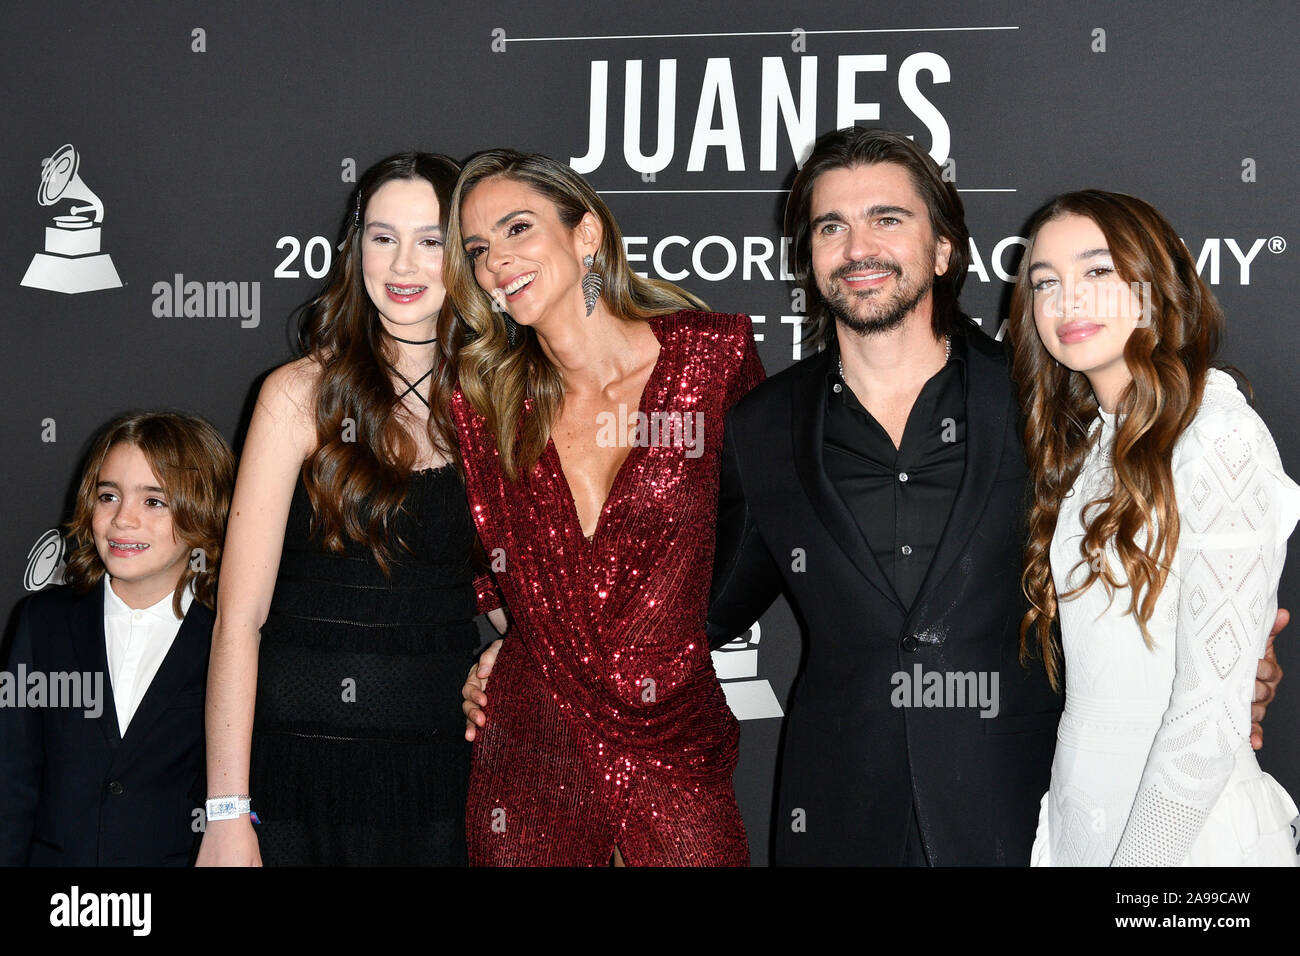 Las Vegas, NV, USA. 13th Nov, 2019. Karen Martinez, Juanes and Family at the 2019 Latin Recording Academy Person of the Year gala, honoring Juanes, during the 20th Annual Latin Grammy Awards in Las Vegas, Nevada, on November 13, 2019. Credit: Damairs Carter/Media Punch/Alamy Live News Stock Photo